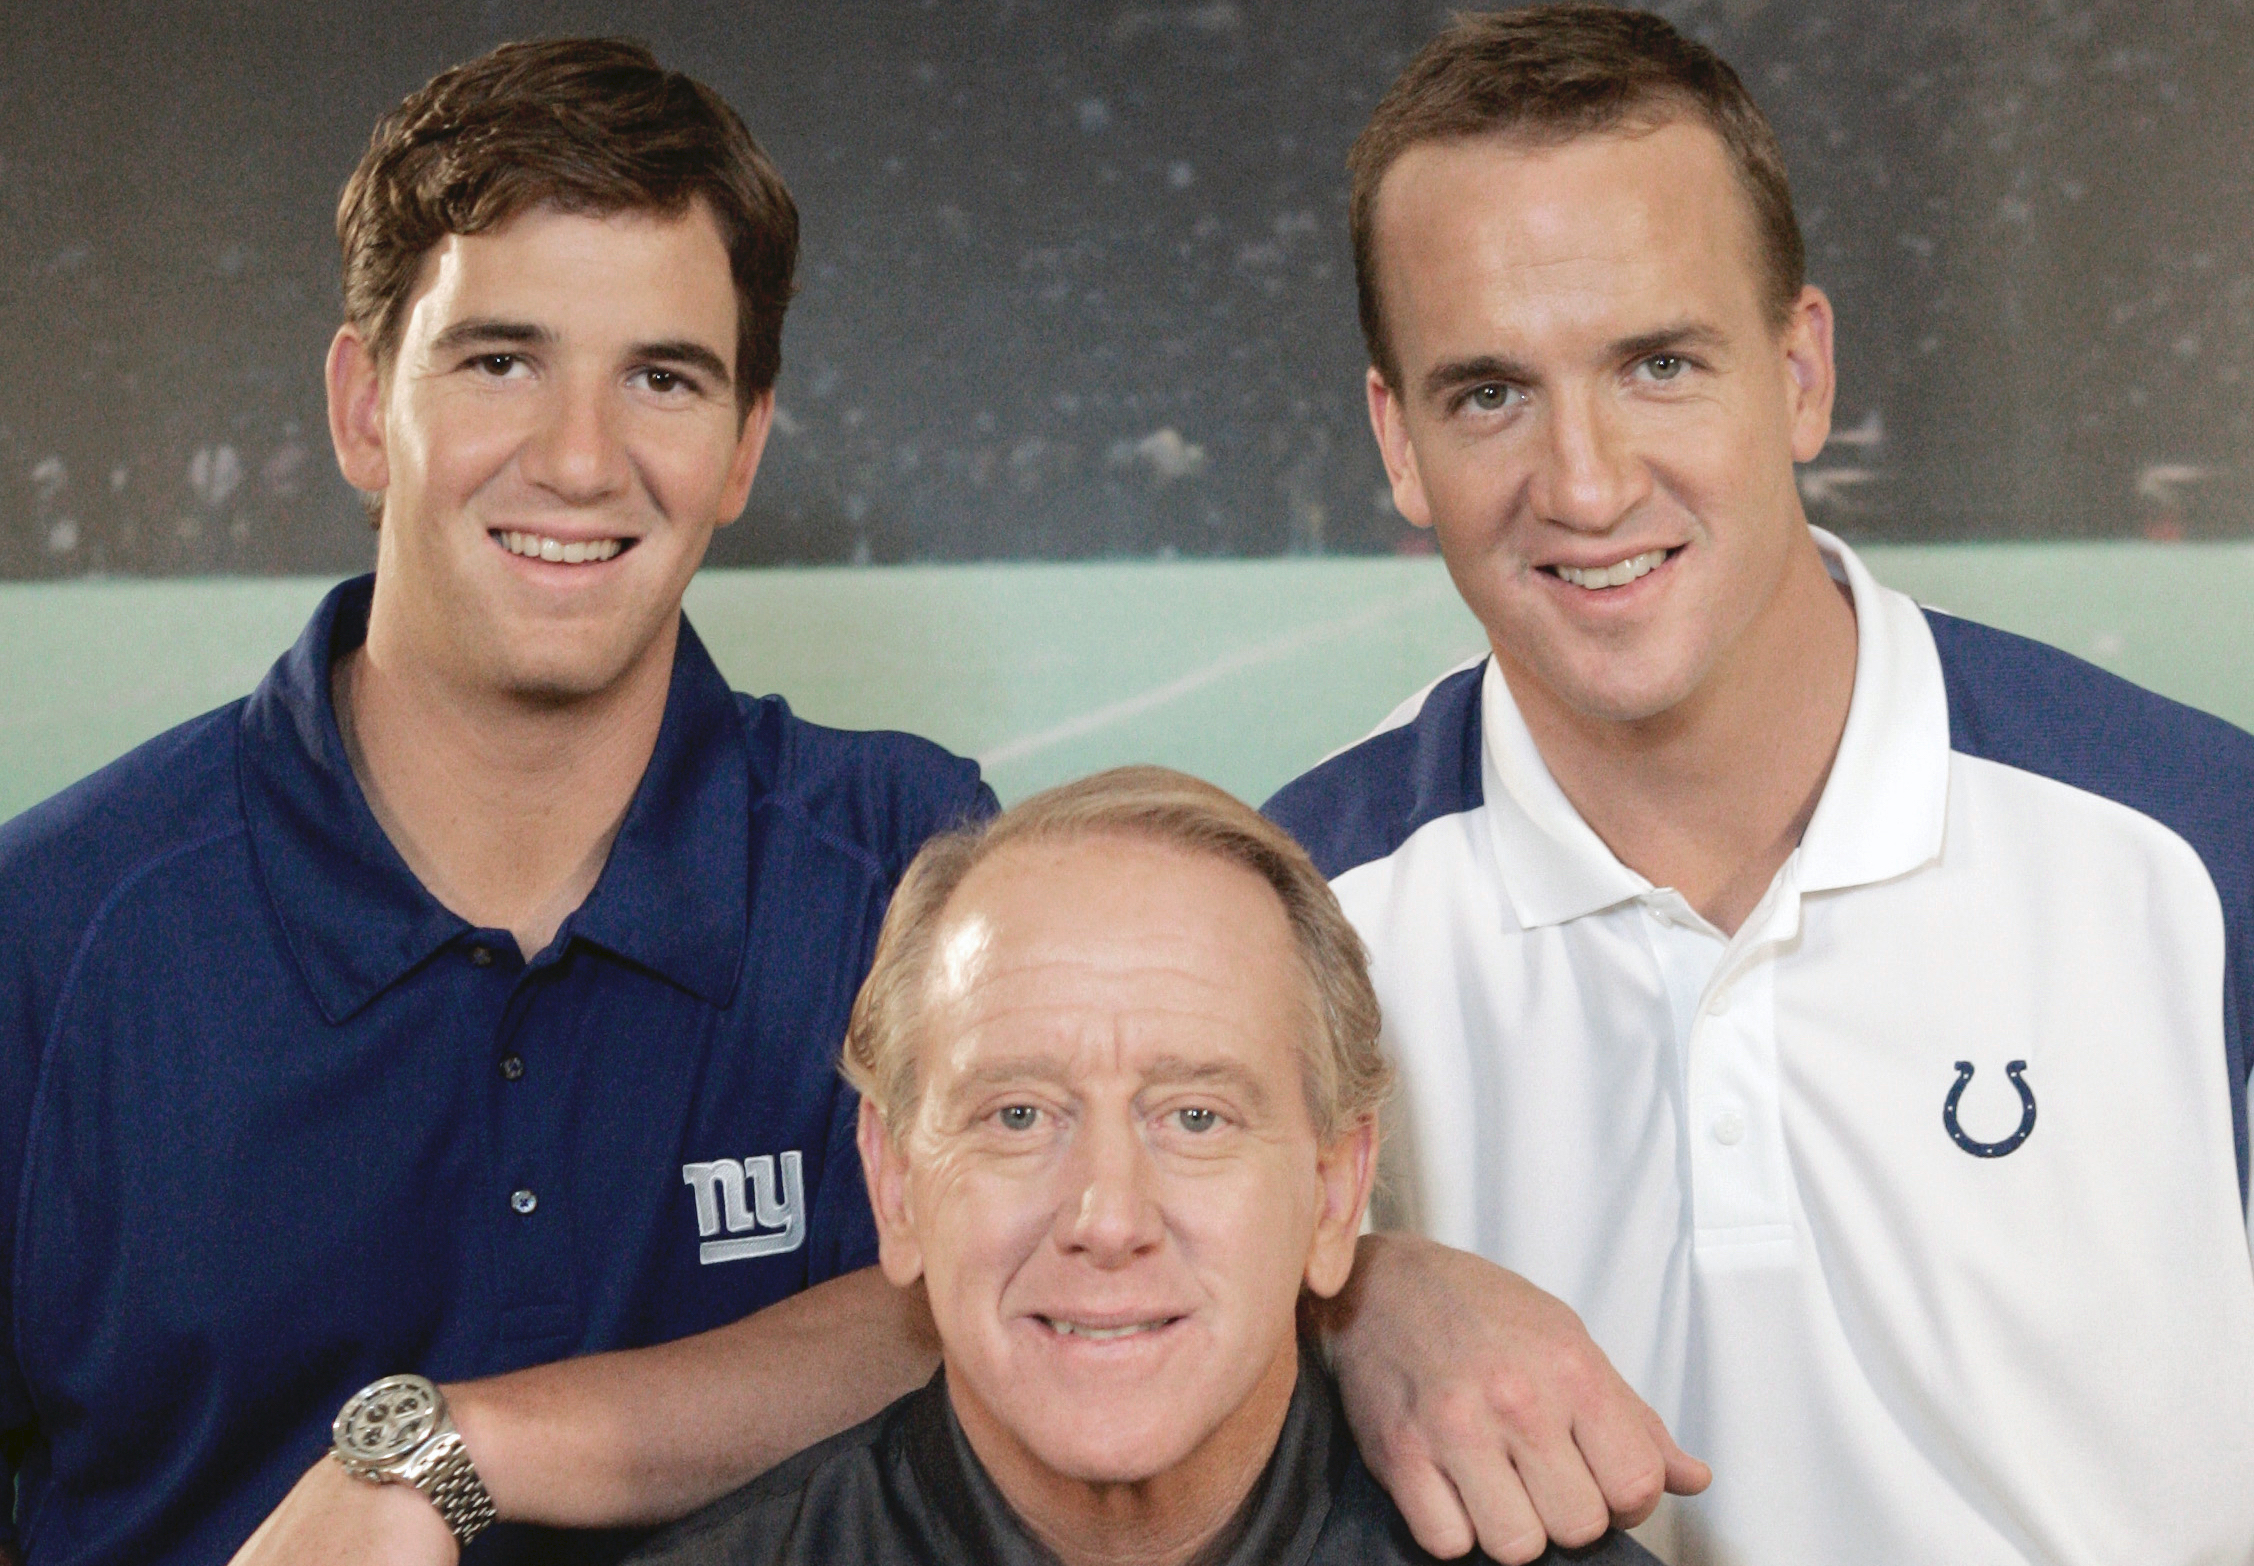 Peyton Manning vs Eli Manning, Who Has the Larger Net Worth Between the Two  Superstar Quarterback Brothers?